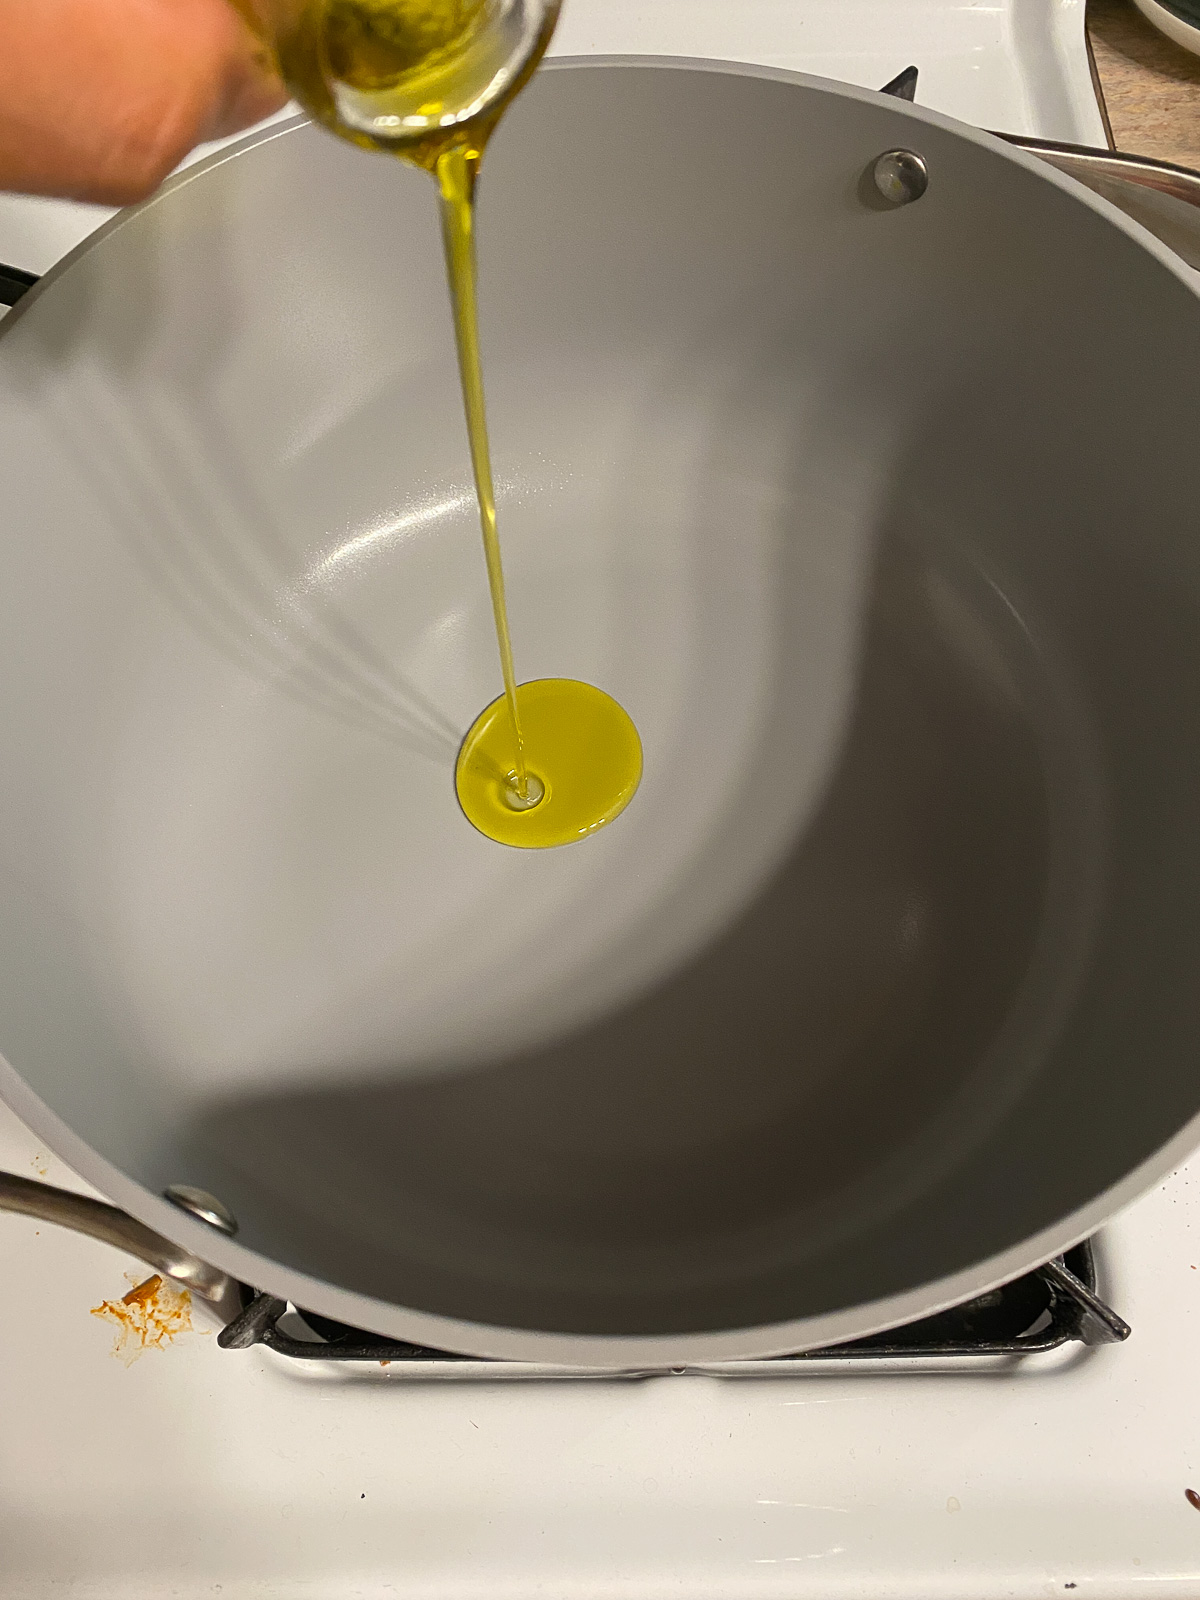 process shot of oil being poured onto a pan